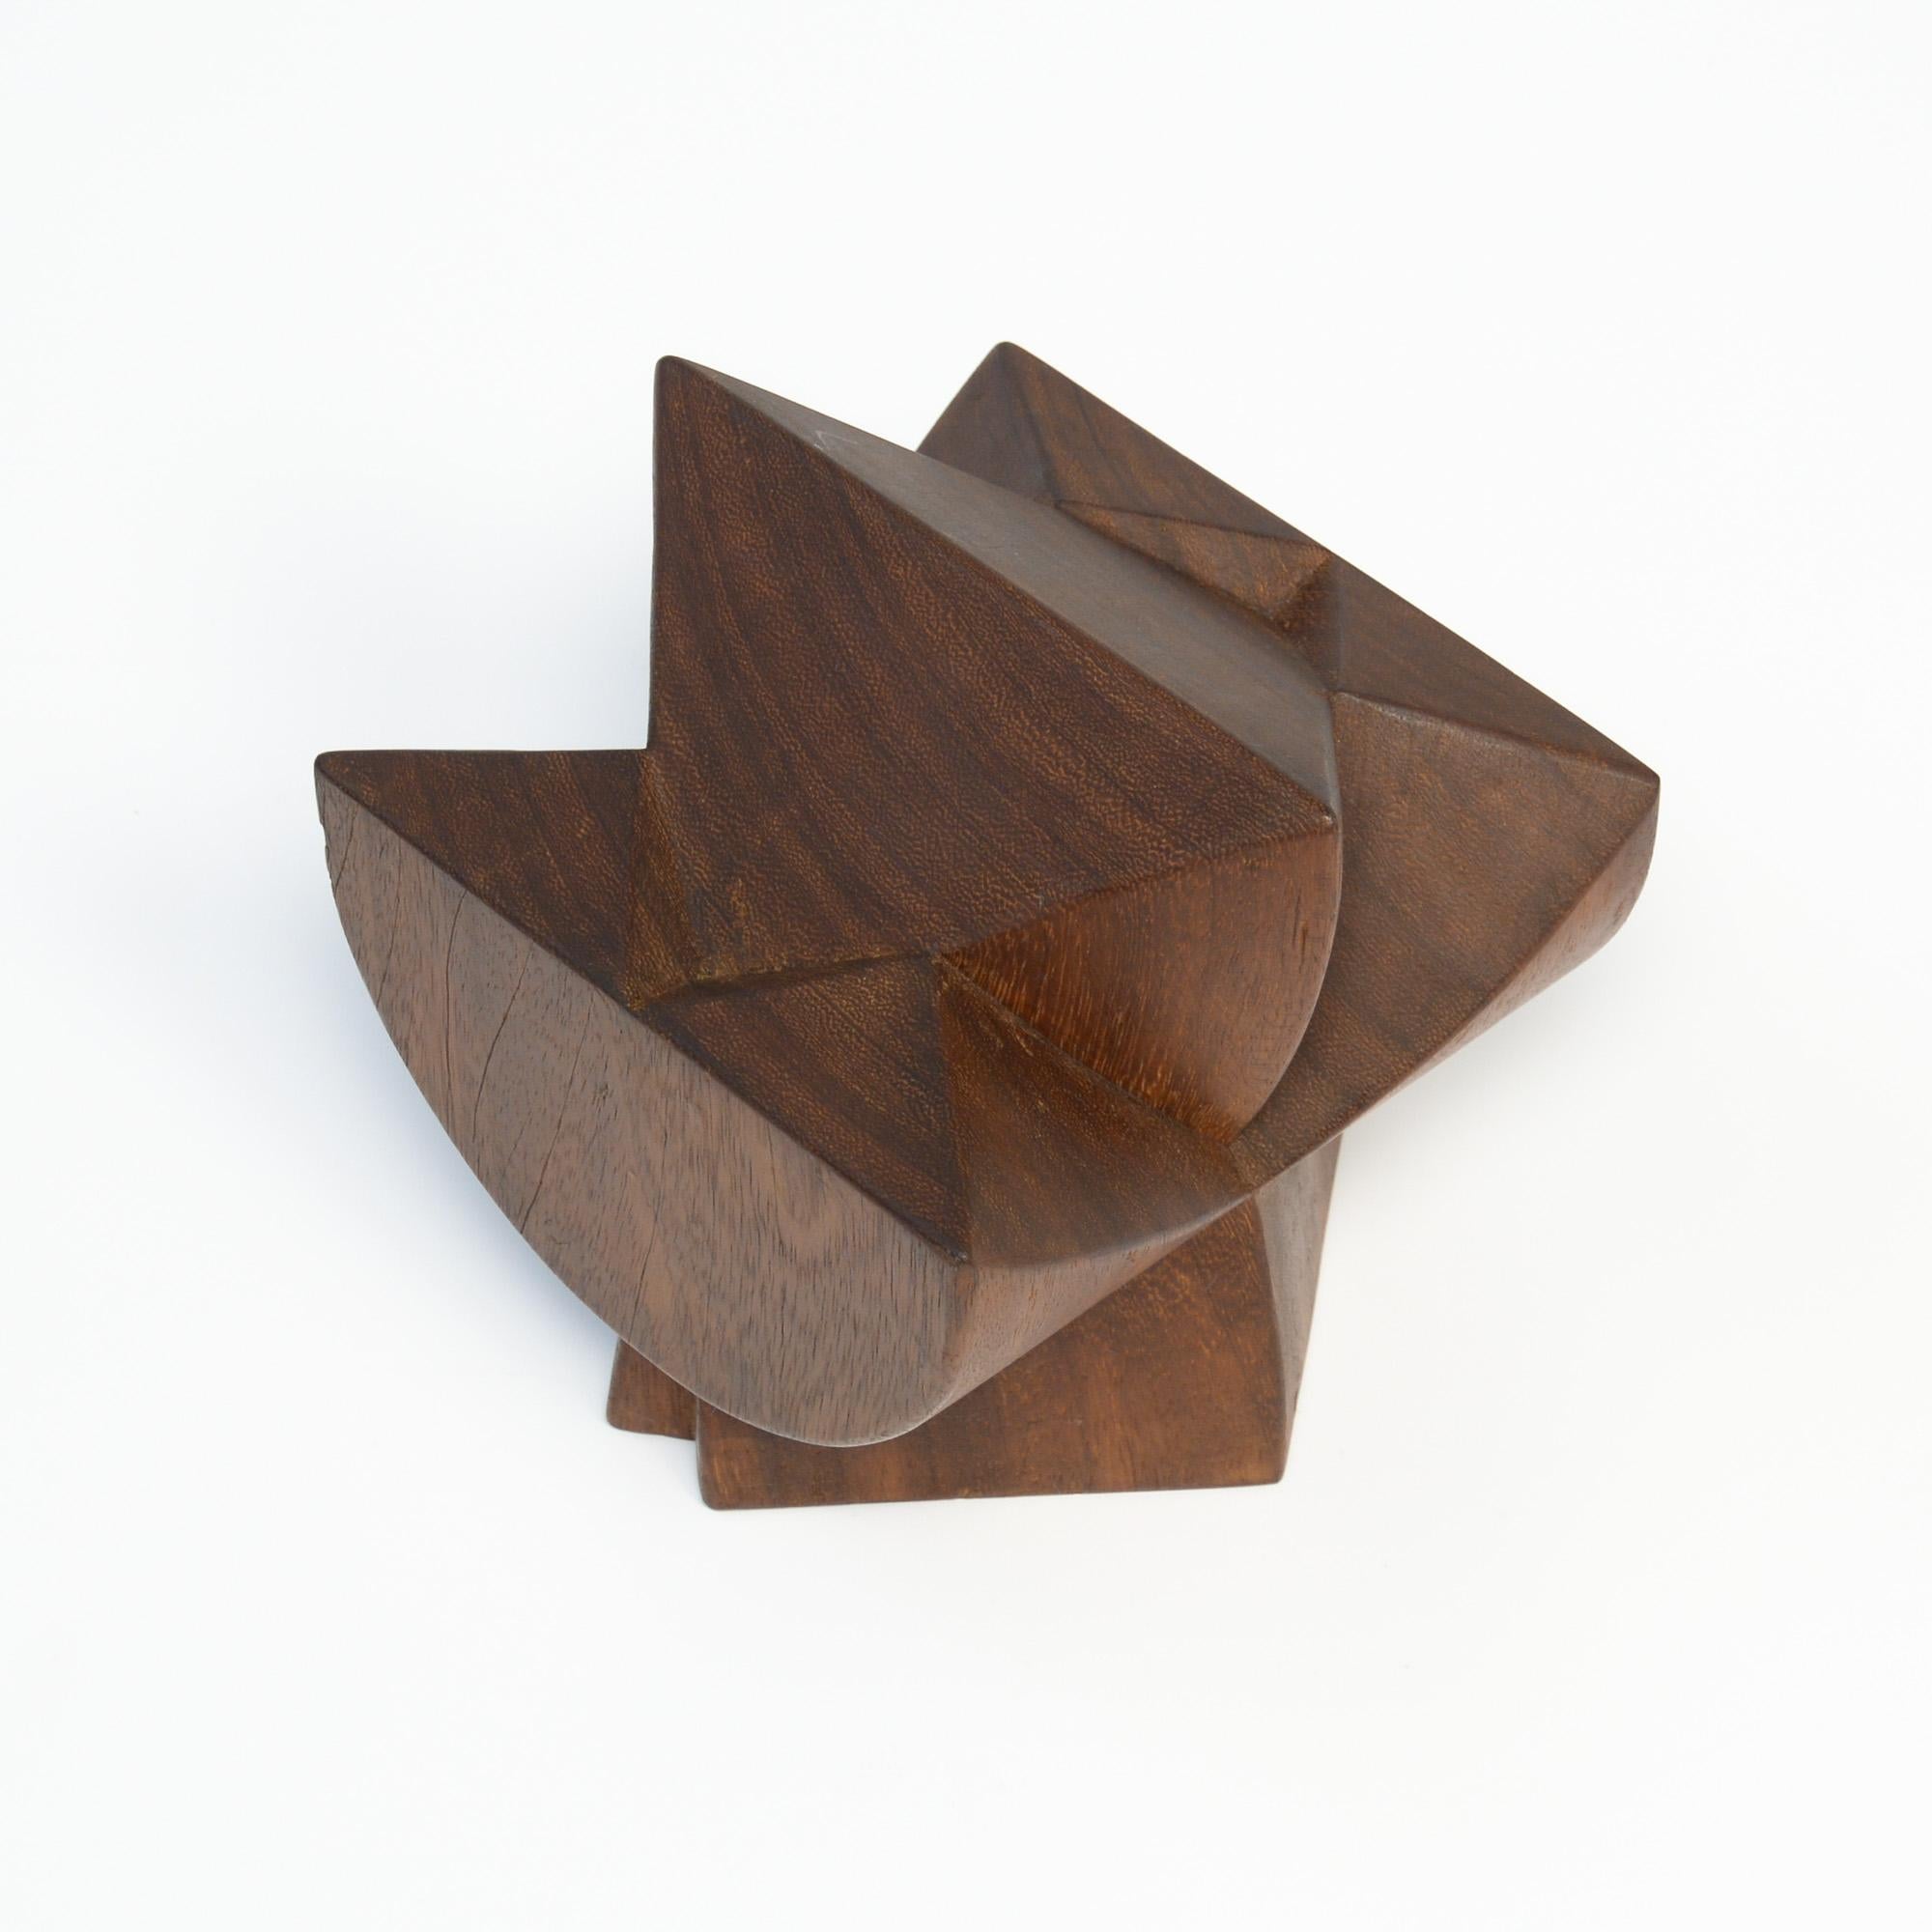 Late 20th Century Abstract Wooden Sculpture